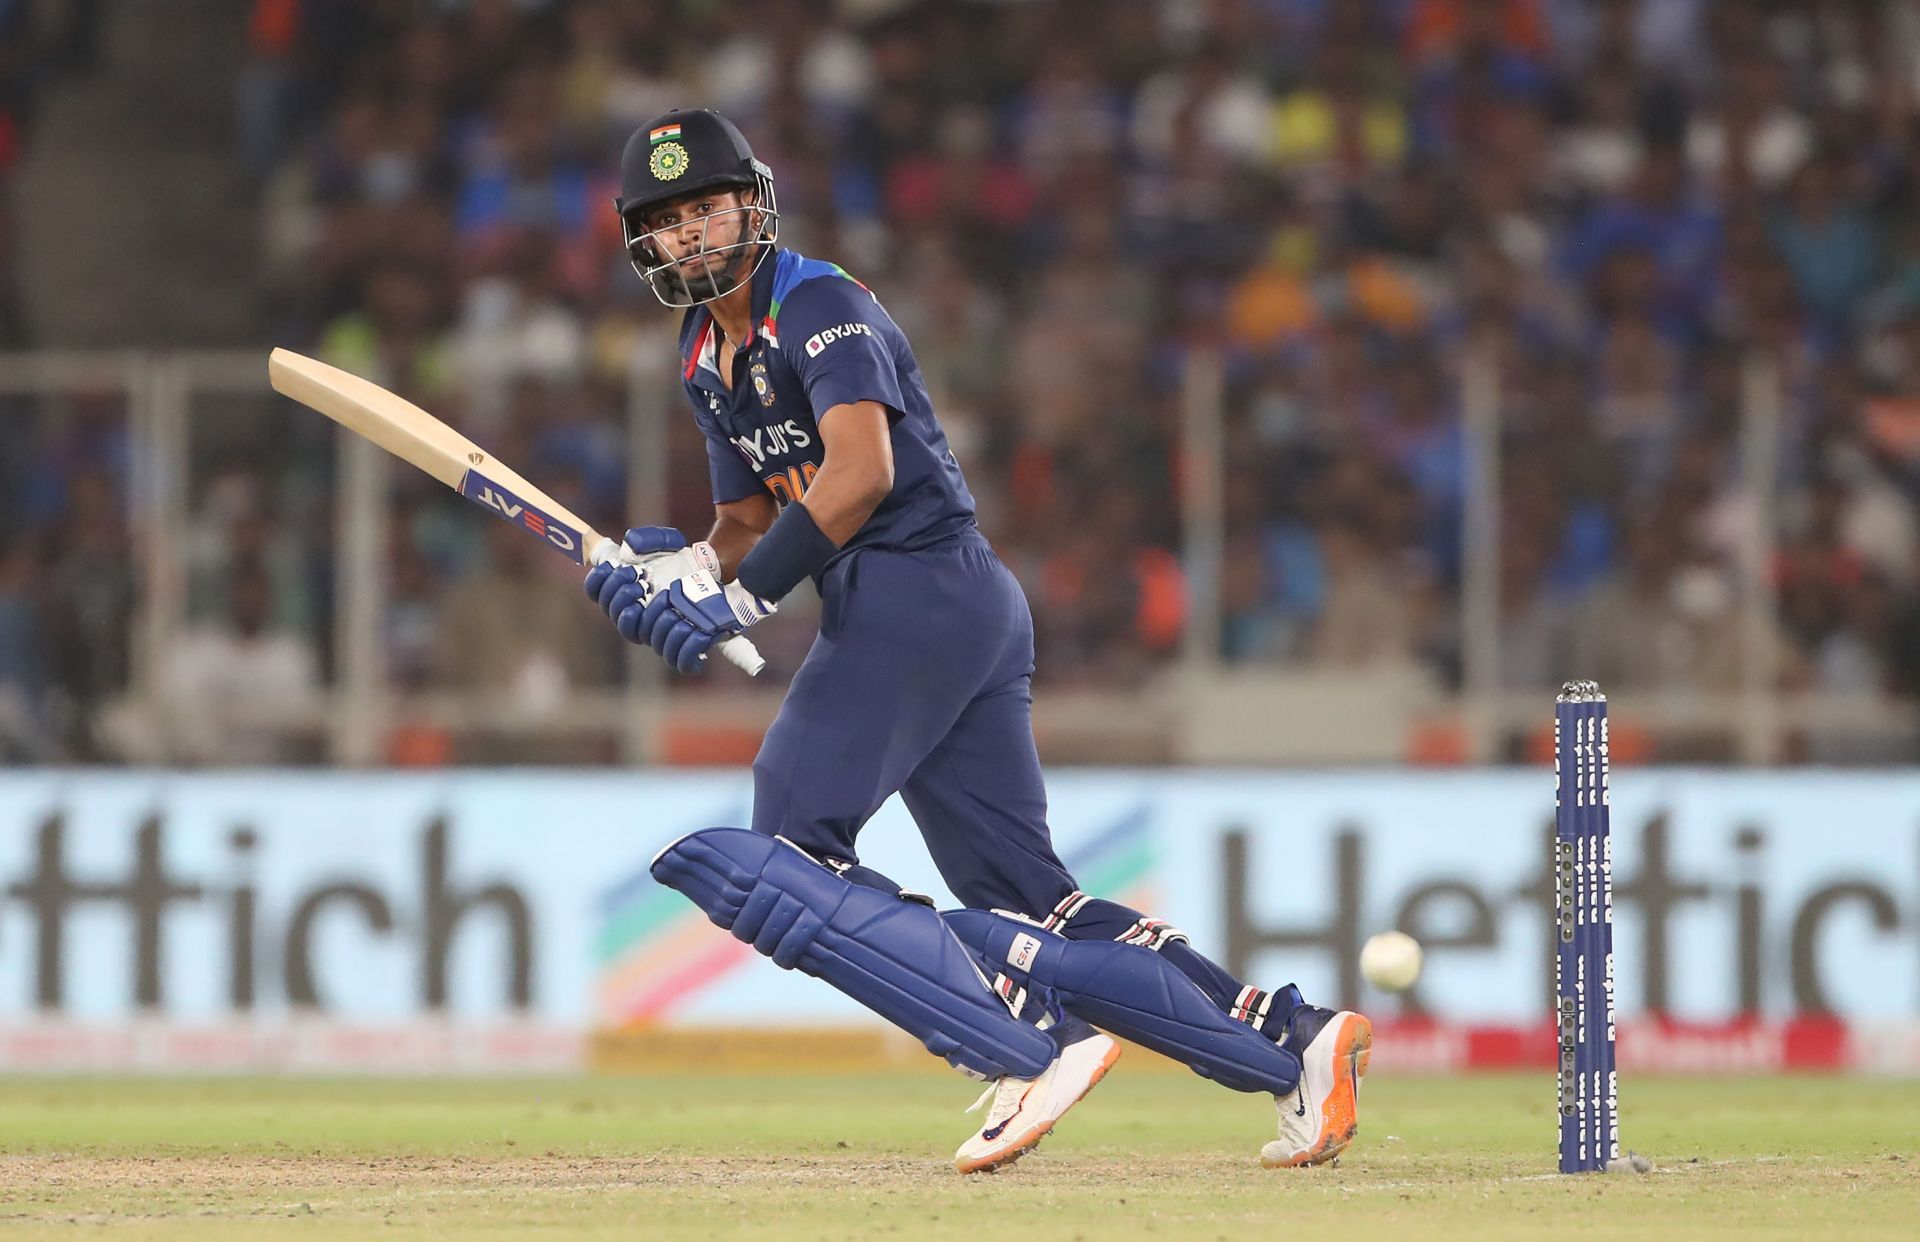 Shreyas Iyer played a 103-run knock against New Zealand in February 2020